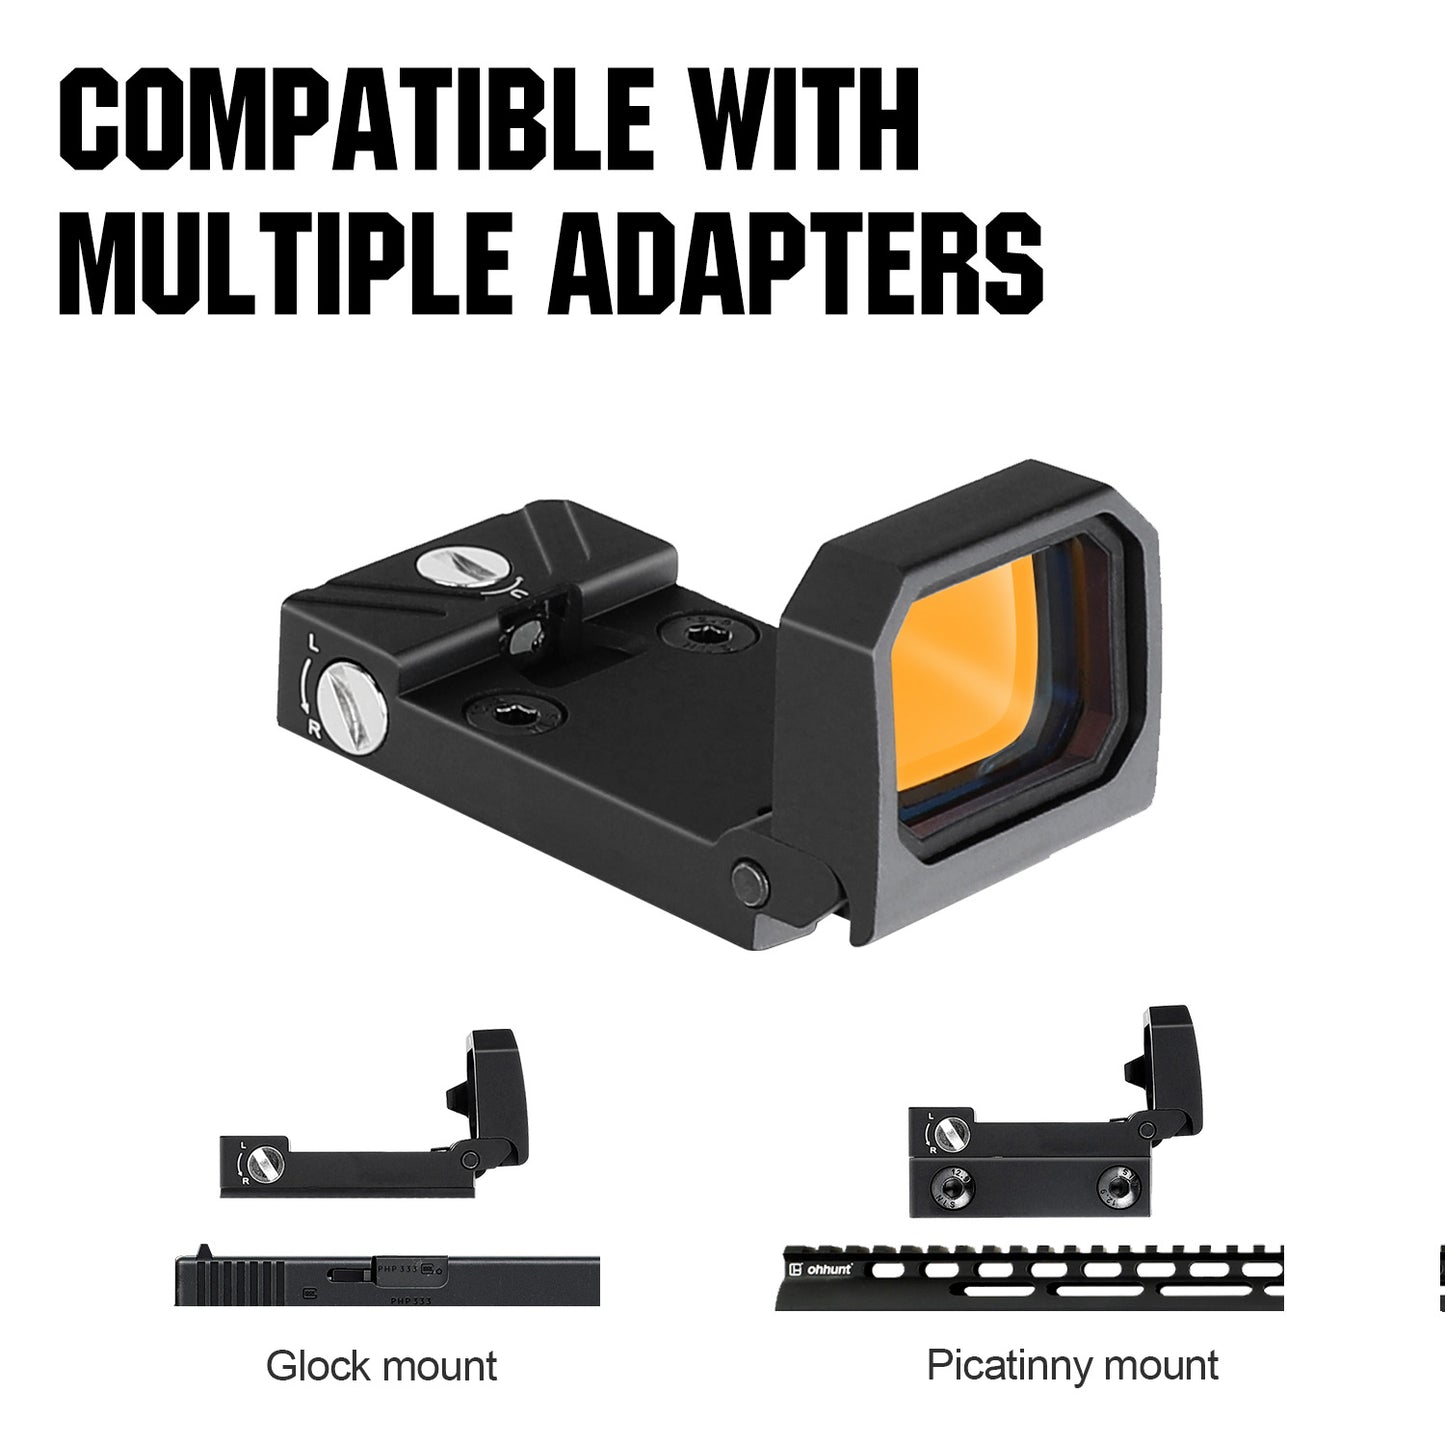  Flip Up 3 Moa Red Dot Sight Come With Multiple Mount Adapters